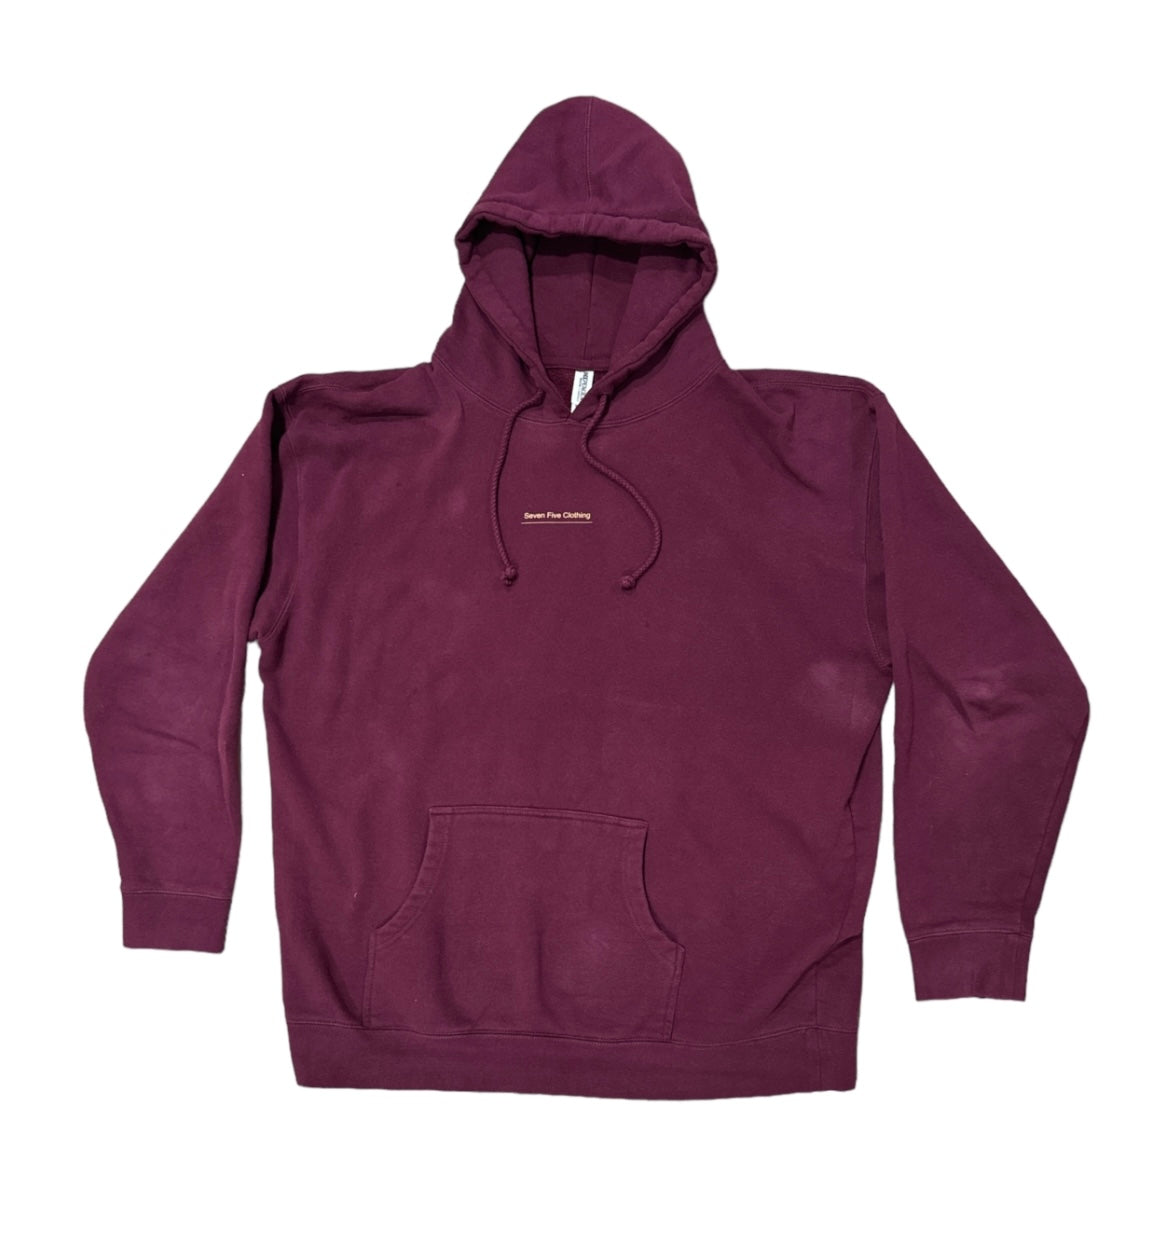 The Classic Hoodie - Maroon - 7Five Clothing Co.